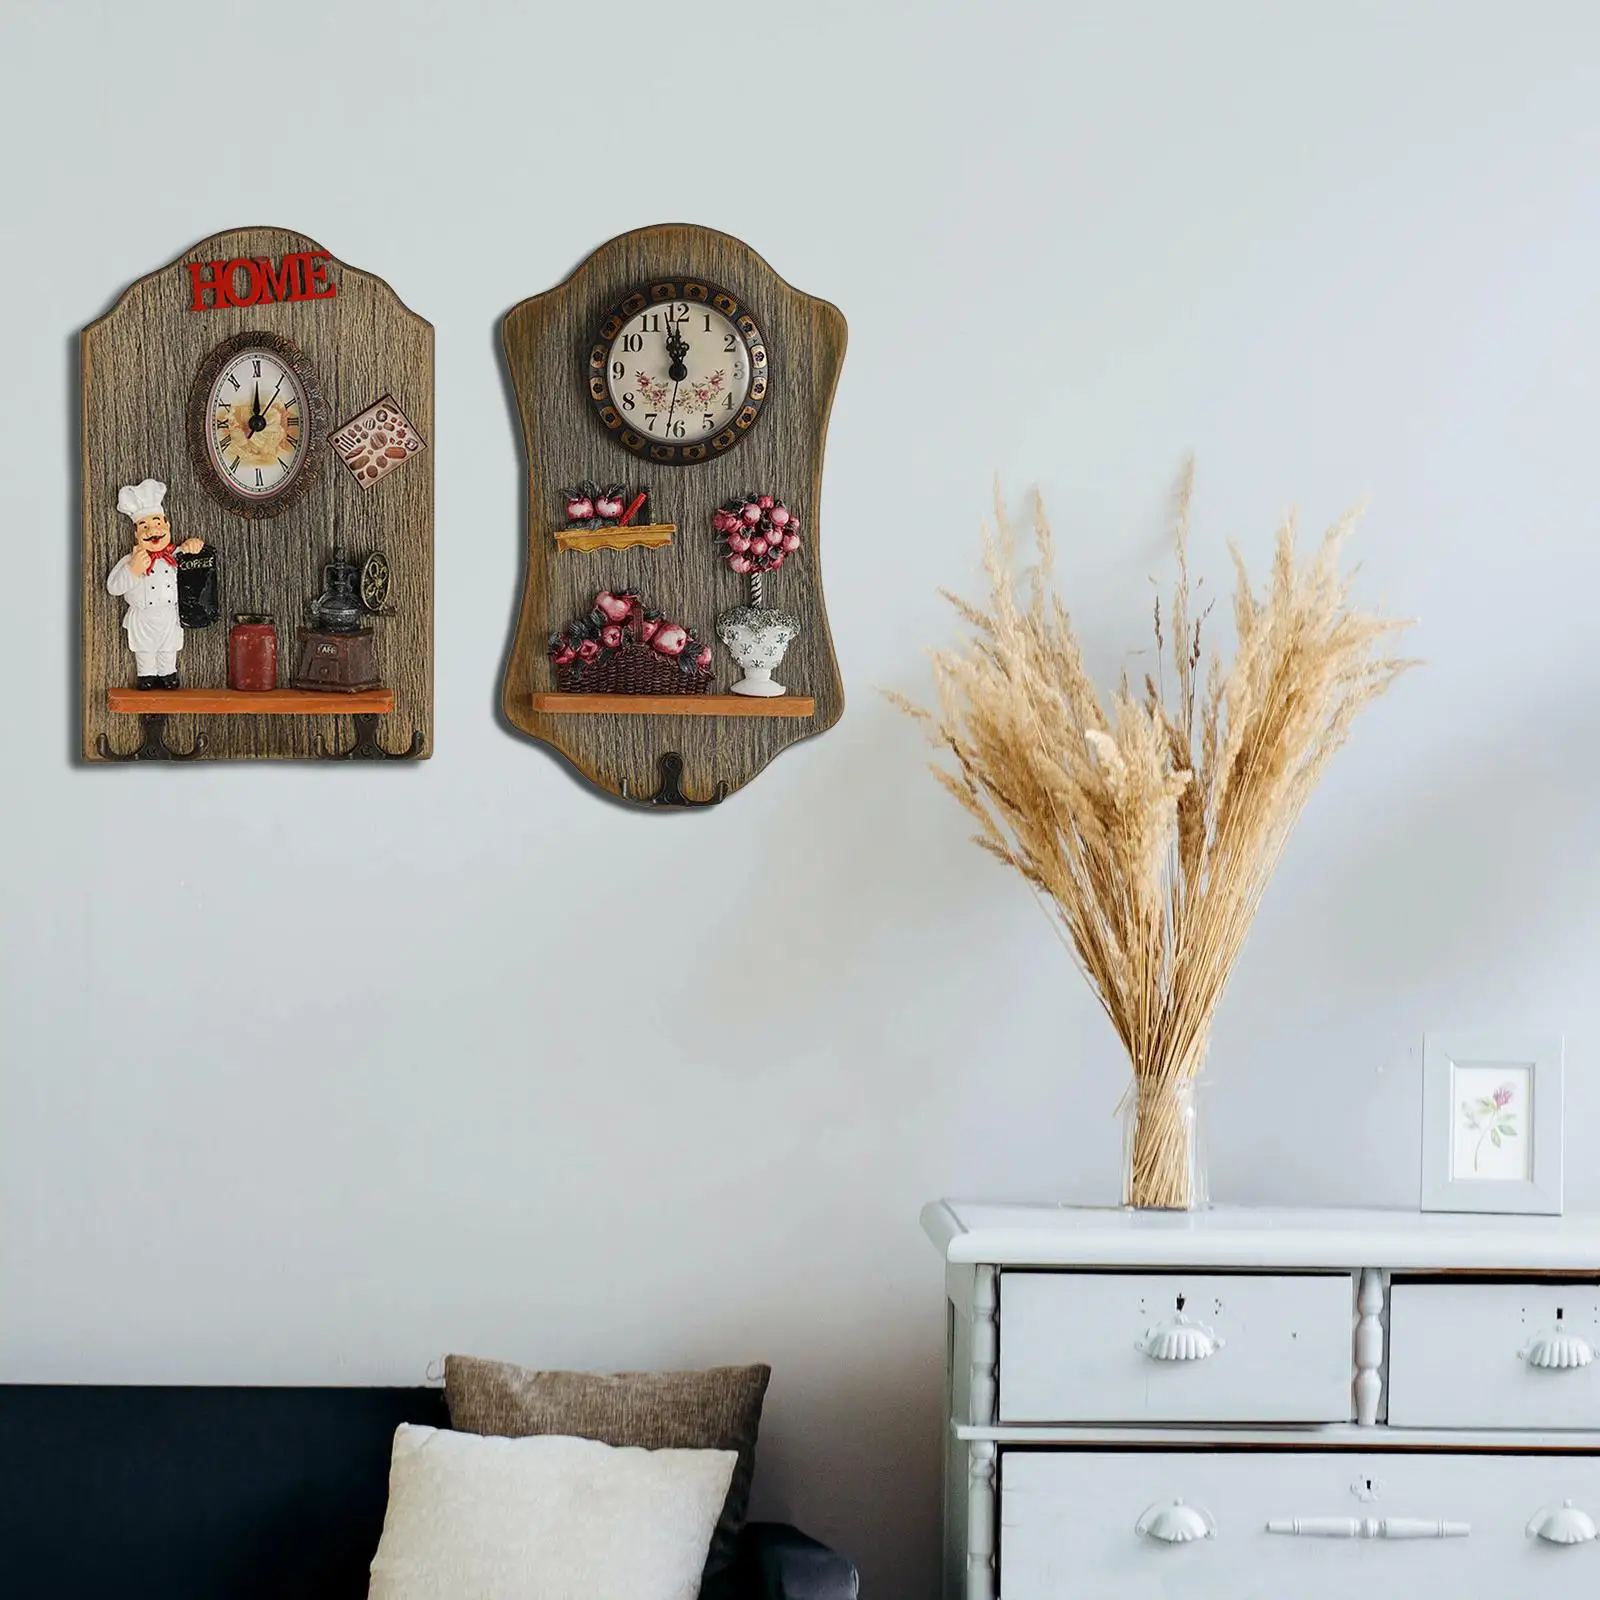 Rustic Wall Clock Creative Hanging Collectable Ornament Clocks for Hotel Dorm Decor Gift